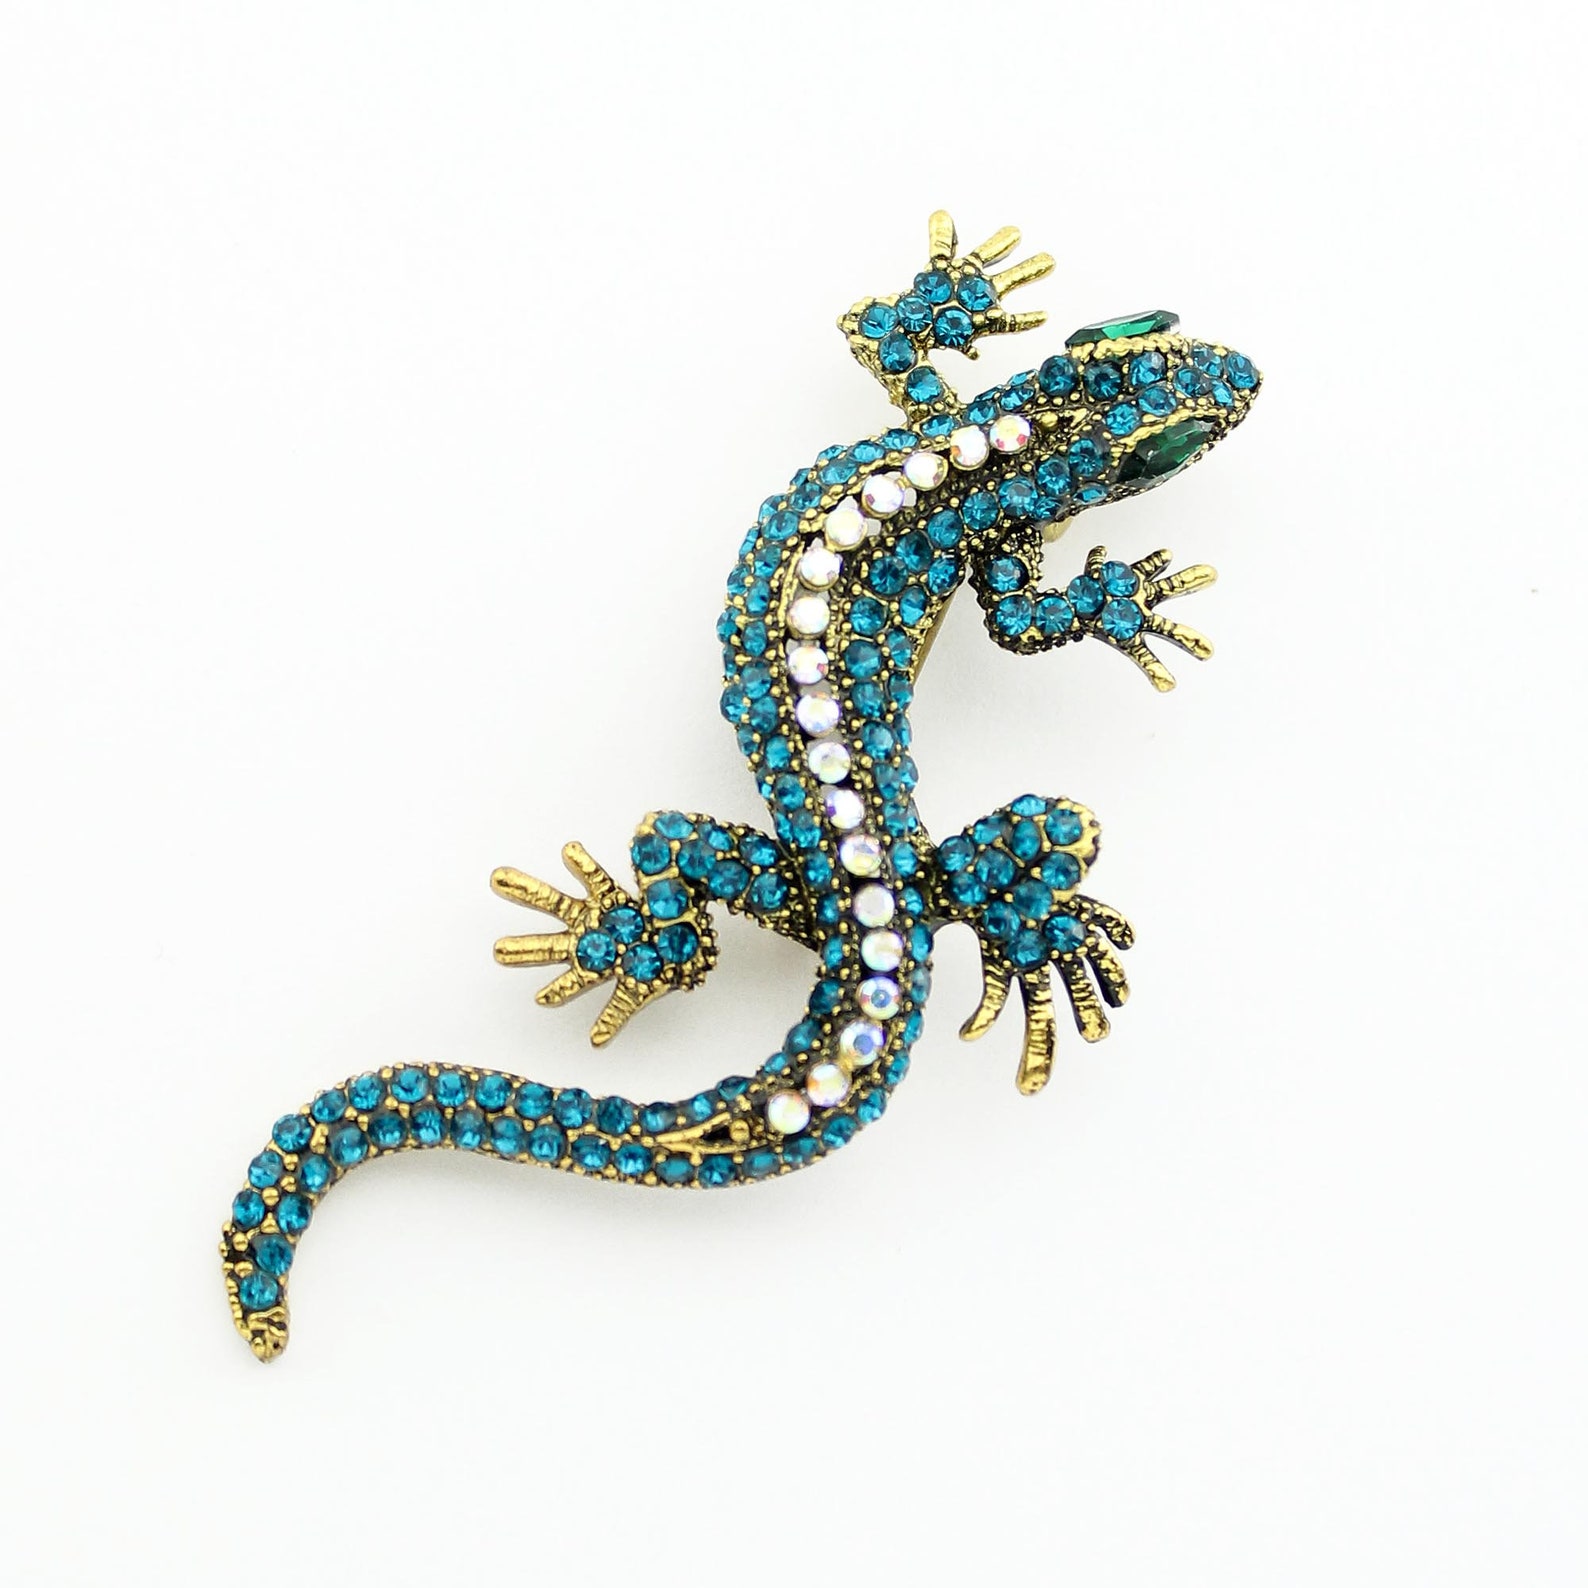 Fashionable Blue Lizard Brooch Gold Reptile Jewelry Chameleon Etsy